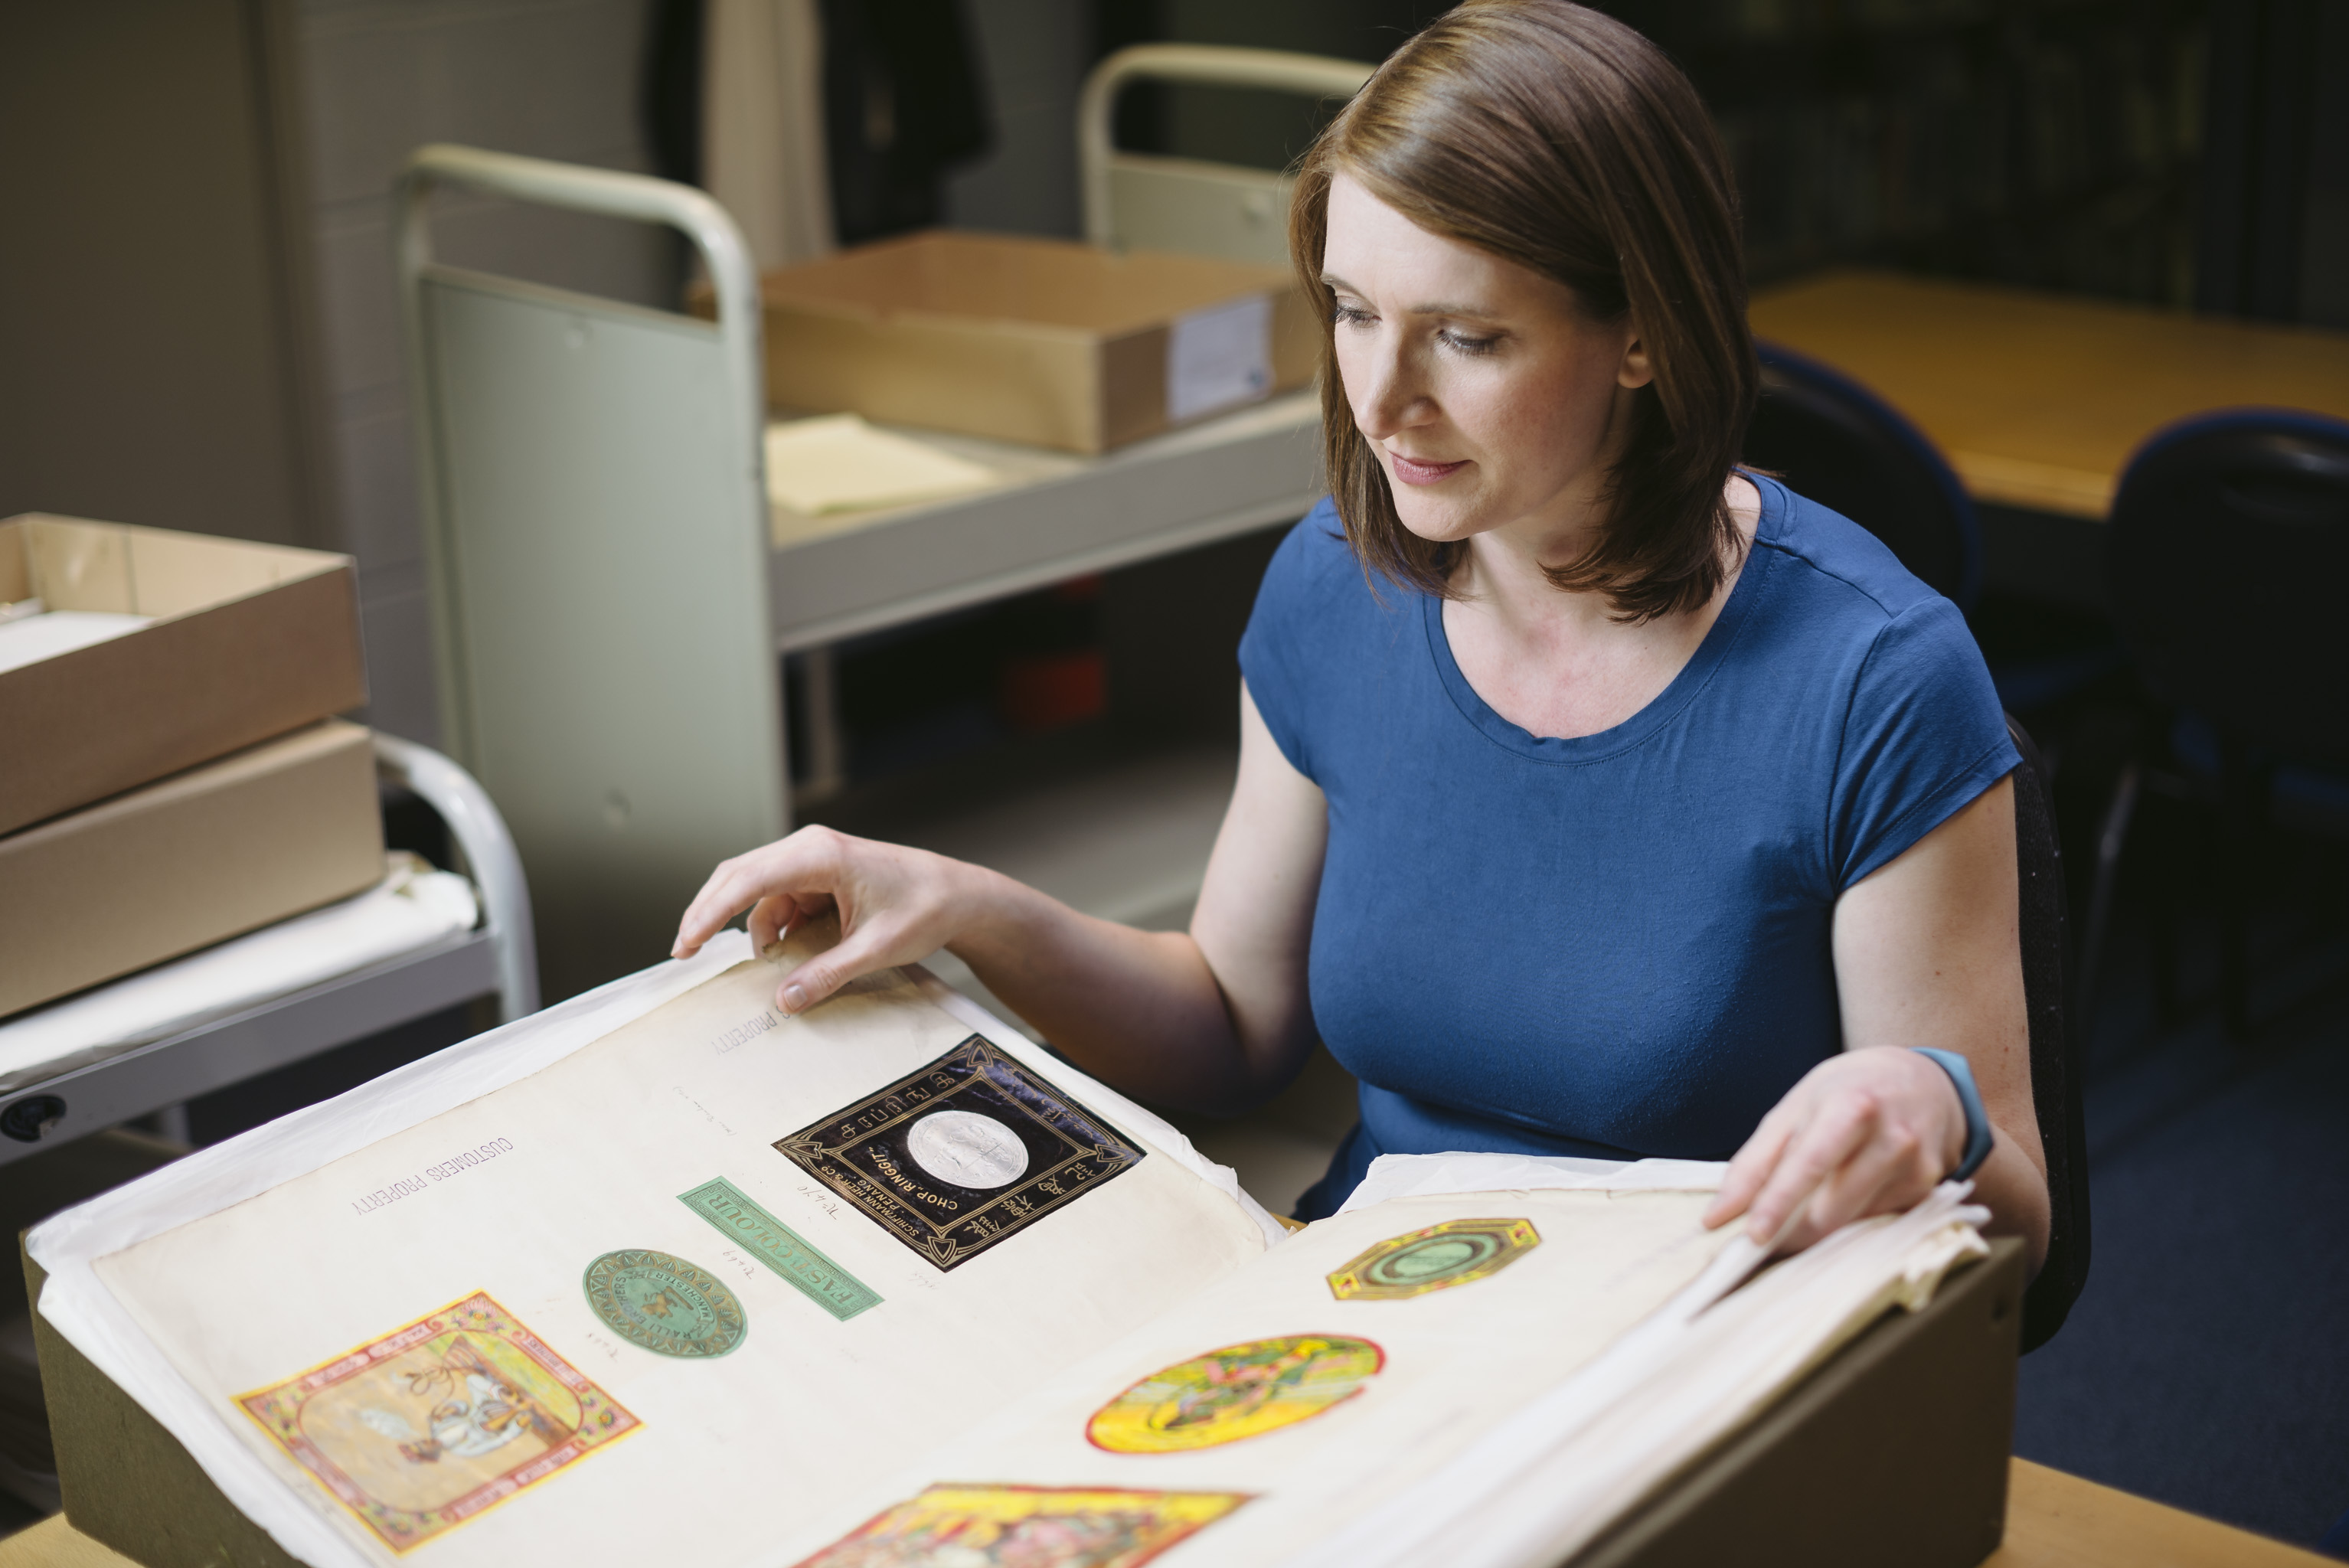 A woman in a blue top leafs through a large album containing colourful images. 